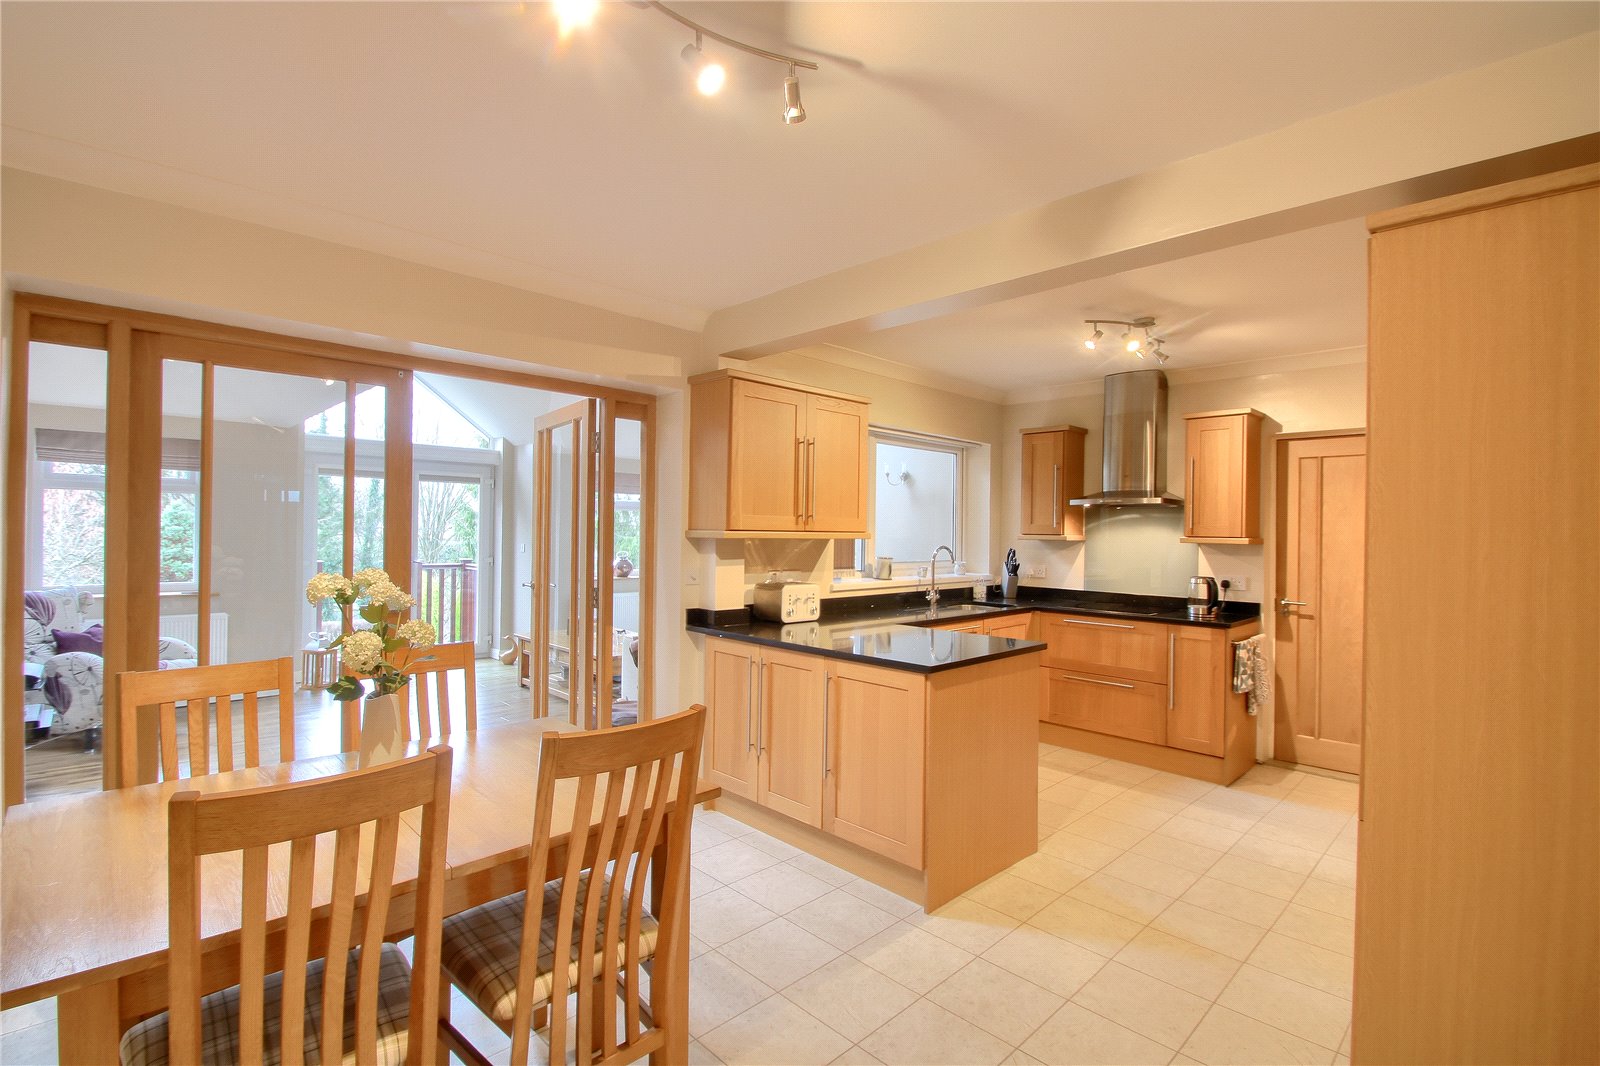 4 bed house for sale  - Property Image 6